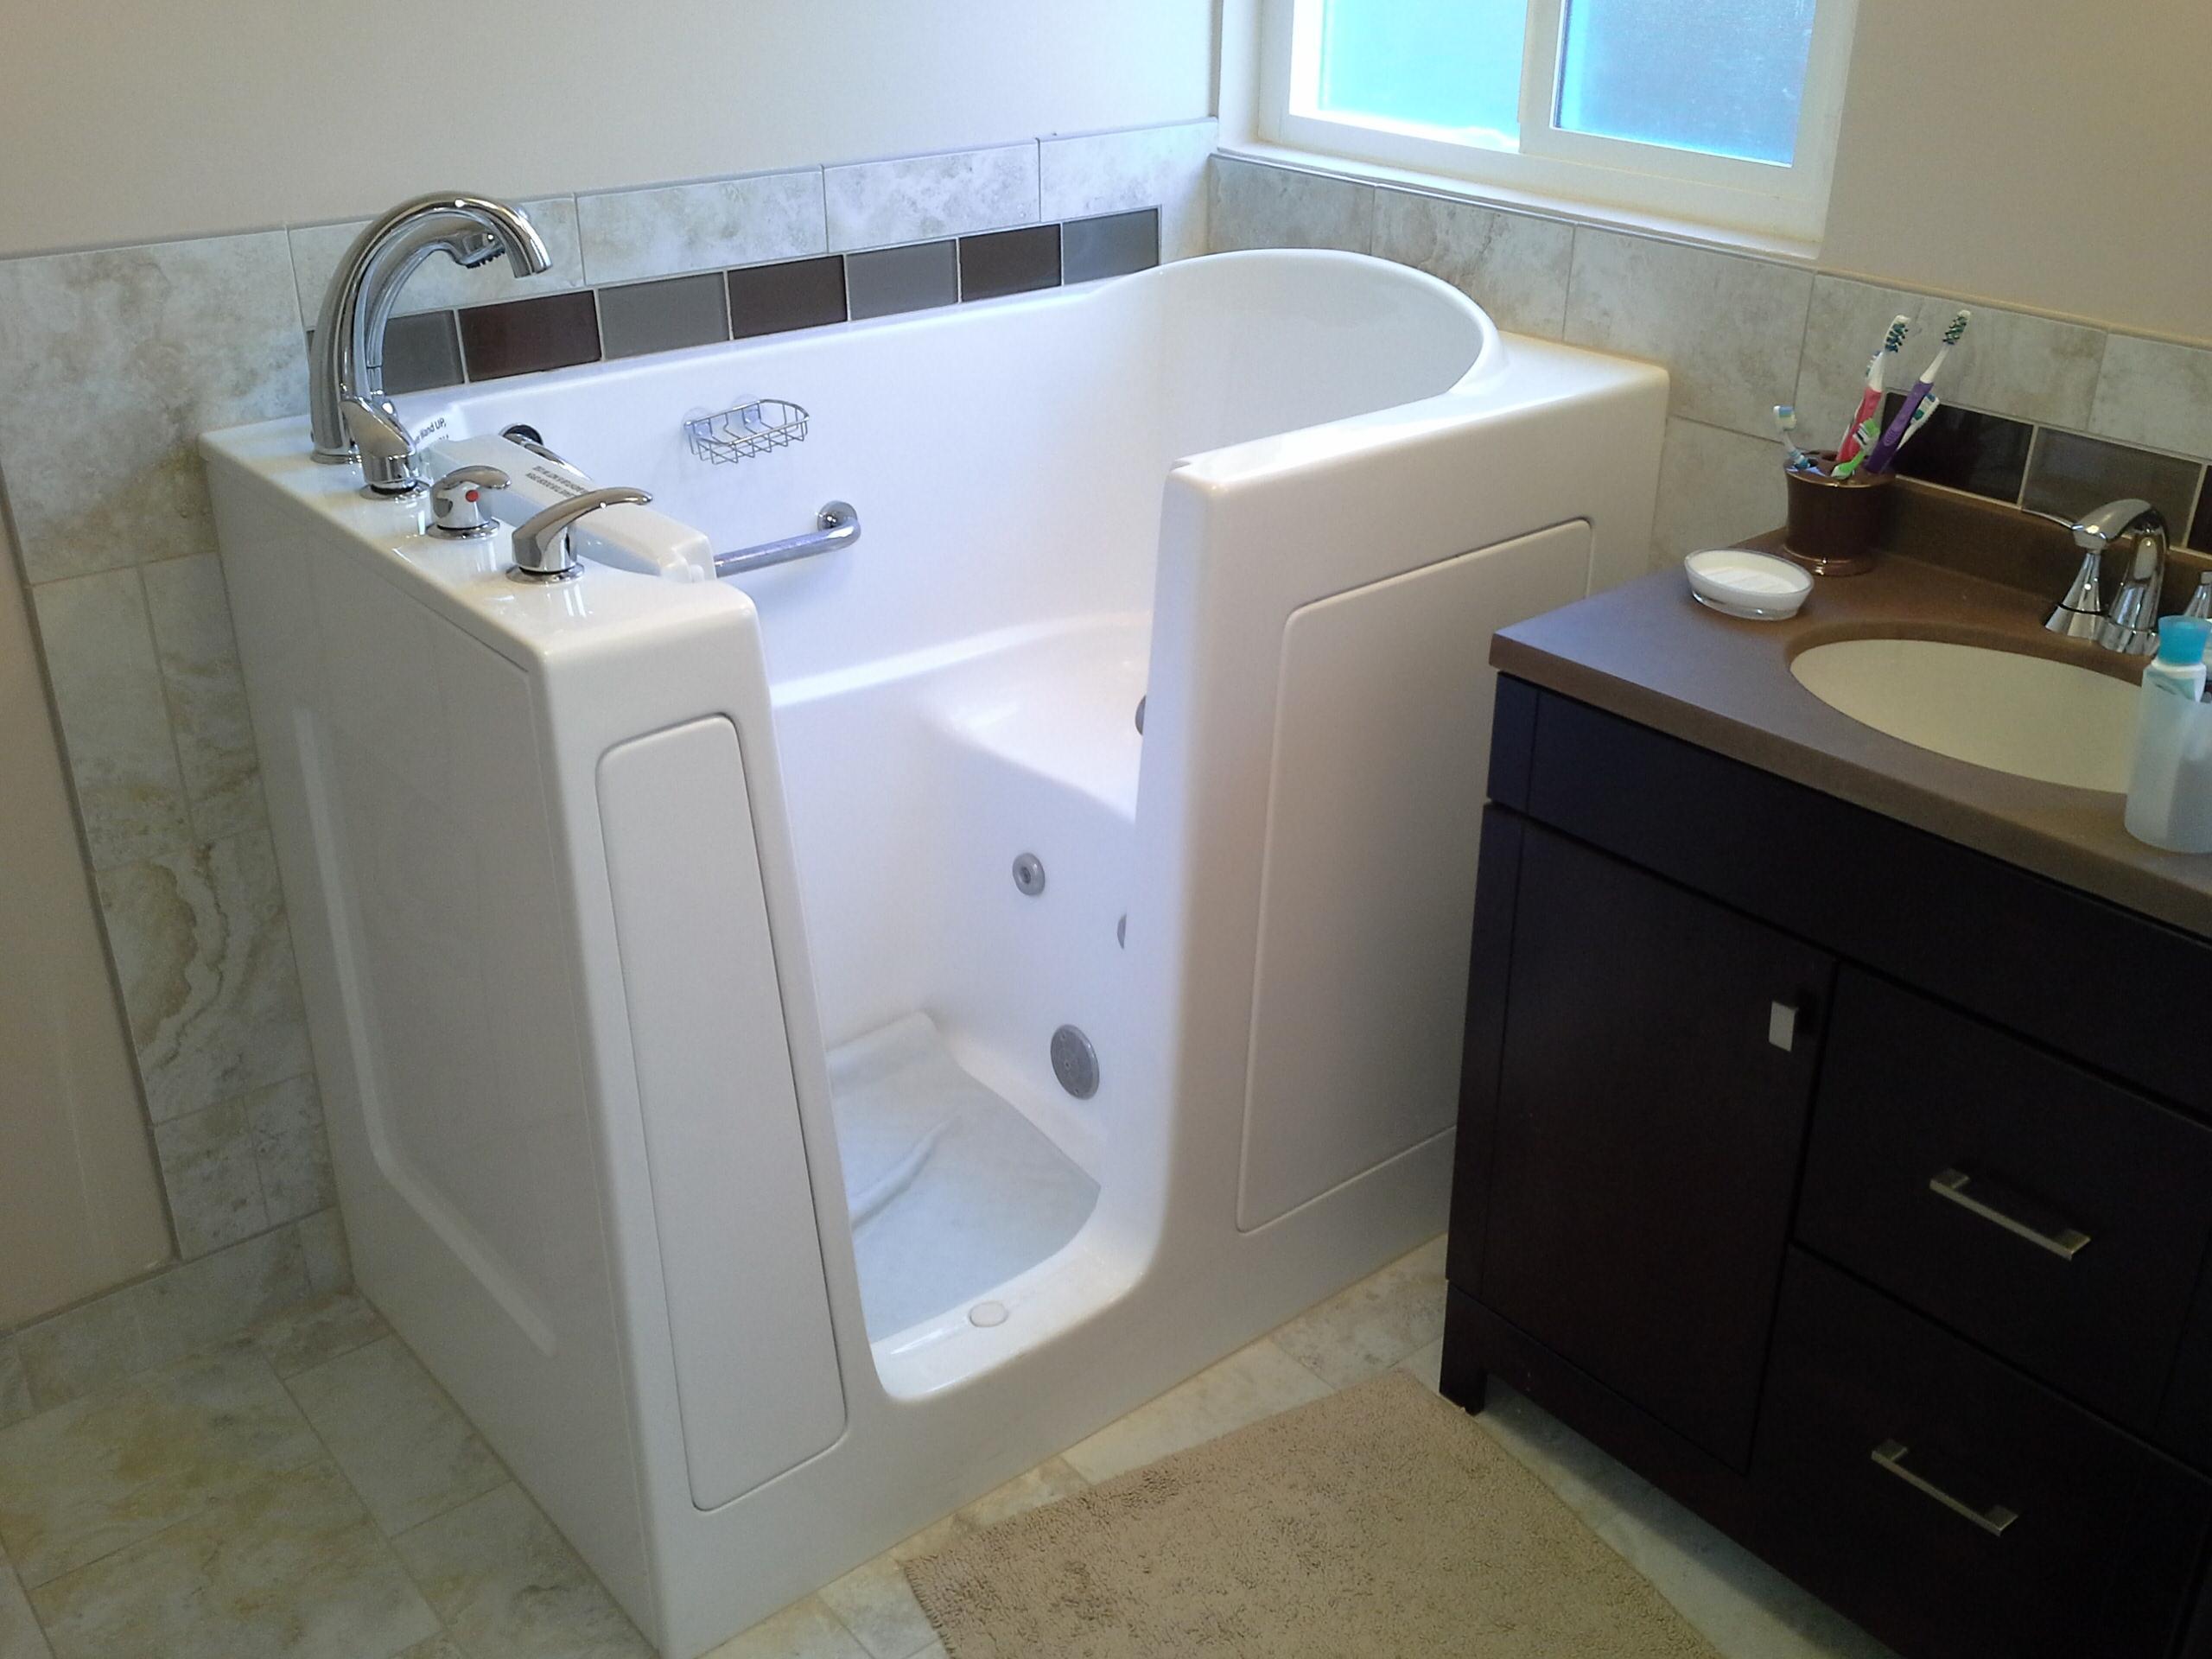 What Are The Pros and Cons To Having A Walk-In Tub